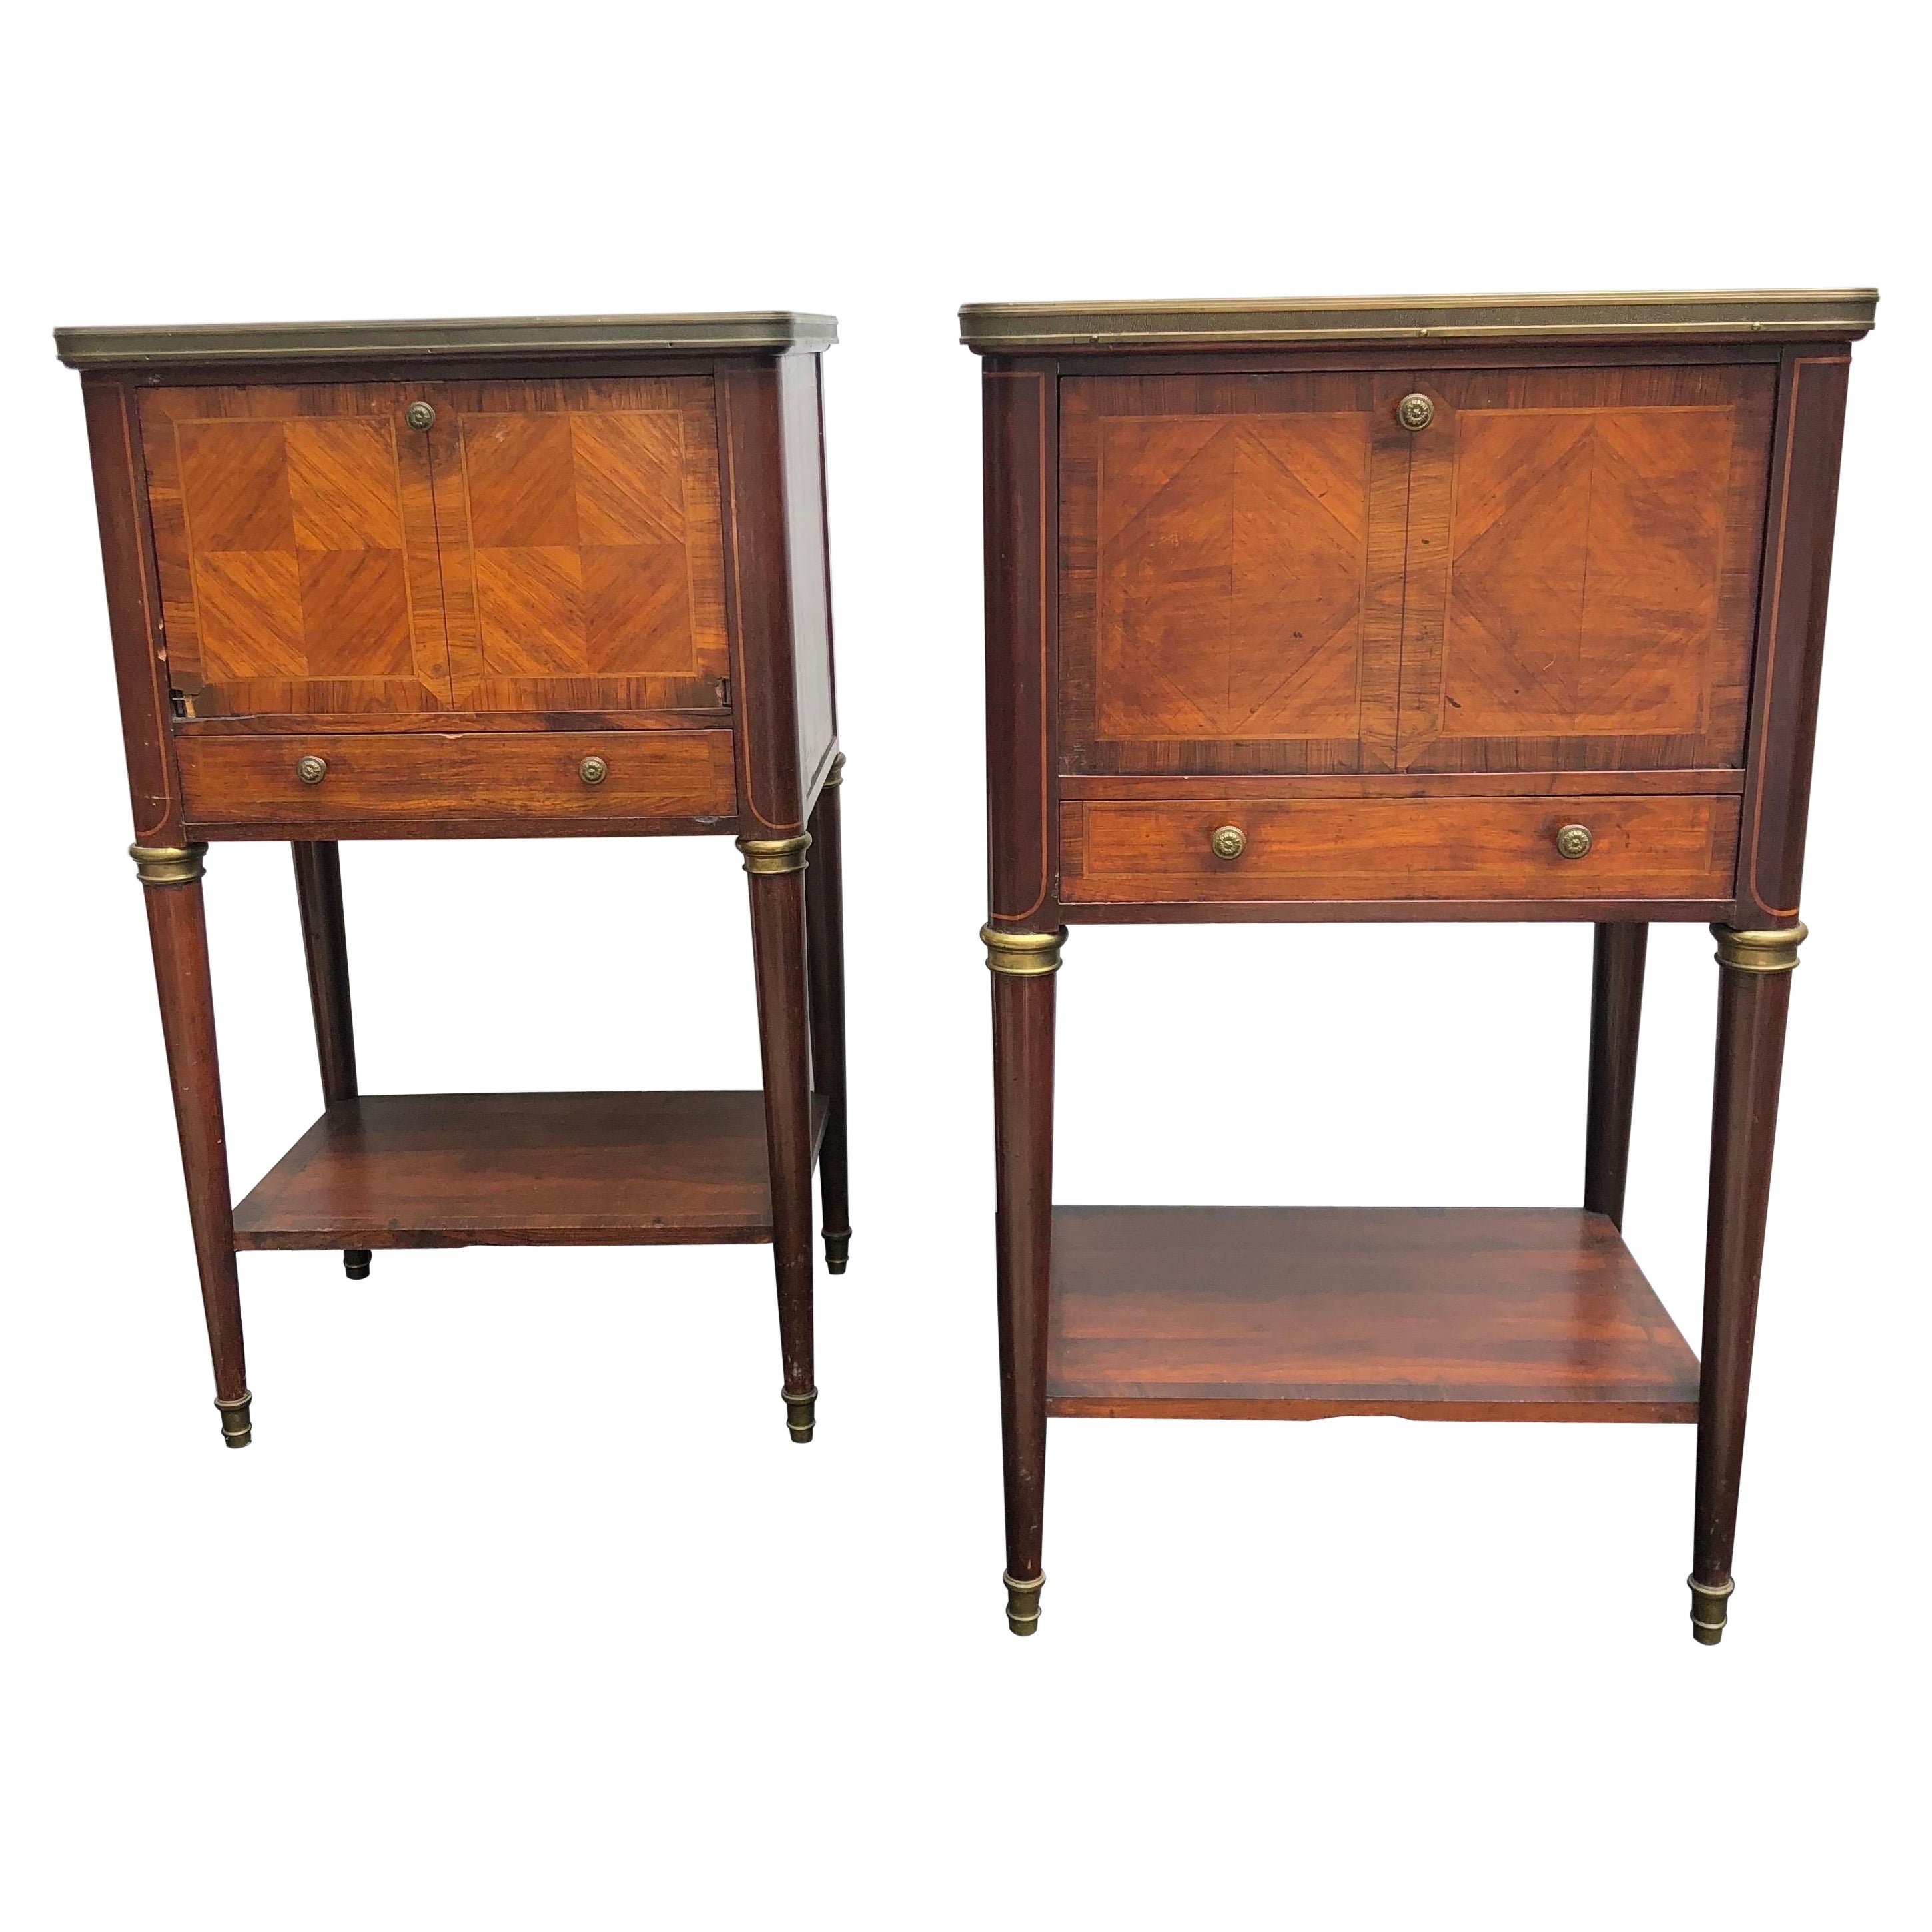 Pair French Directoire Style Marble-Top End Tables / Nightstands, 19th Century